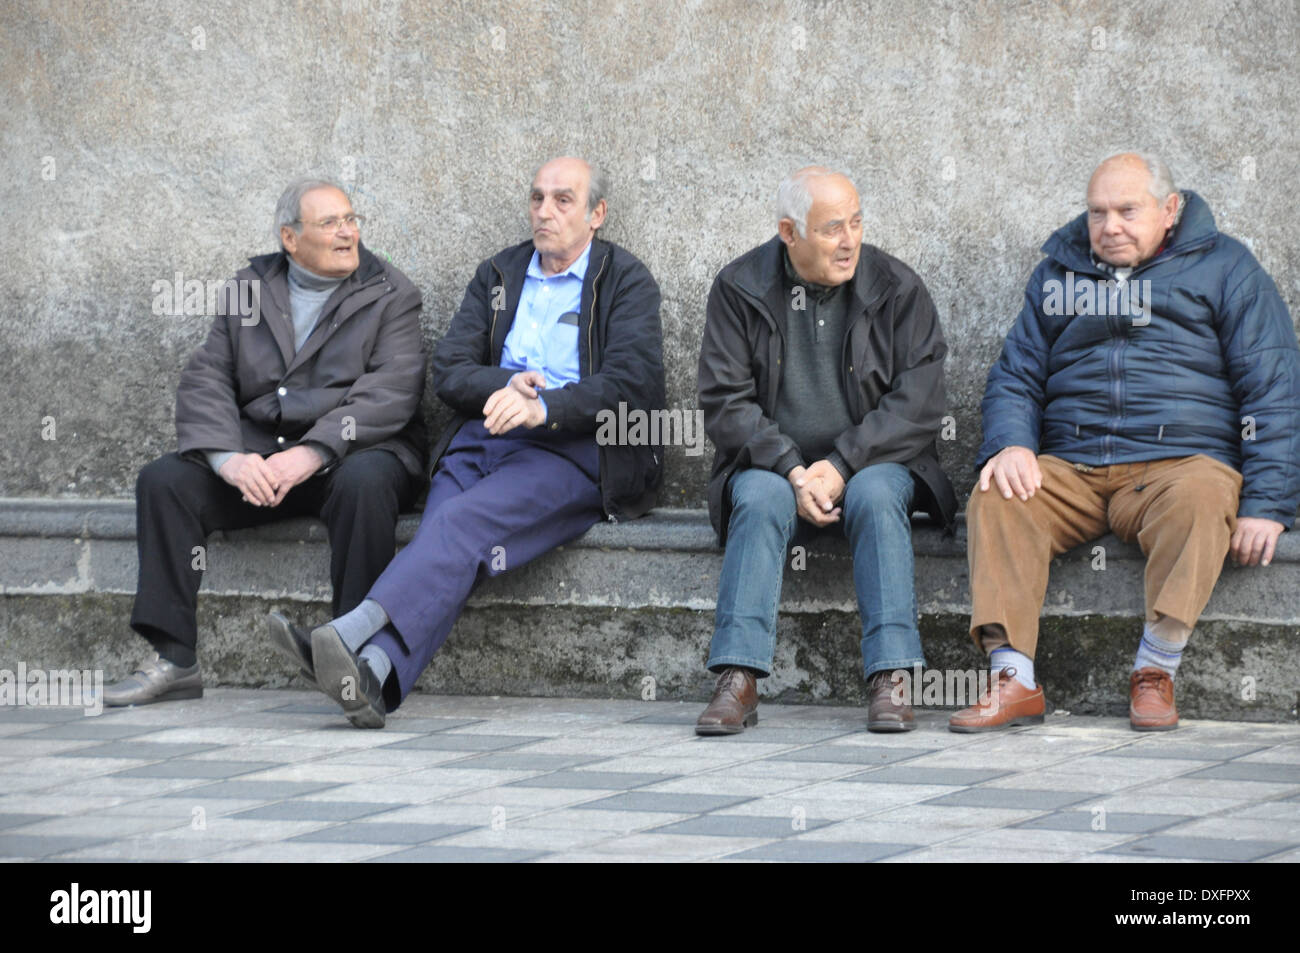 Four elderly men sitting on a bench chatting and passing the time of day. Stock Photo